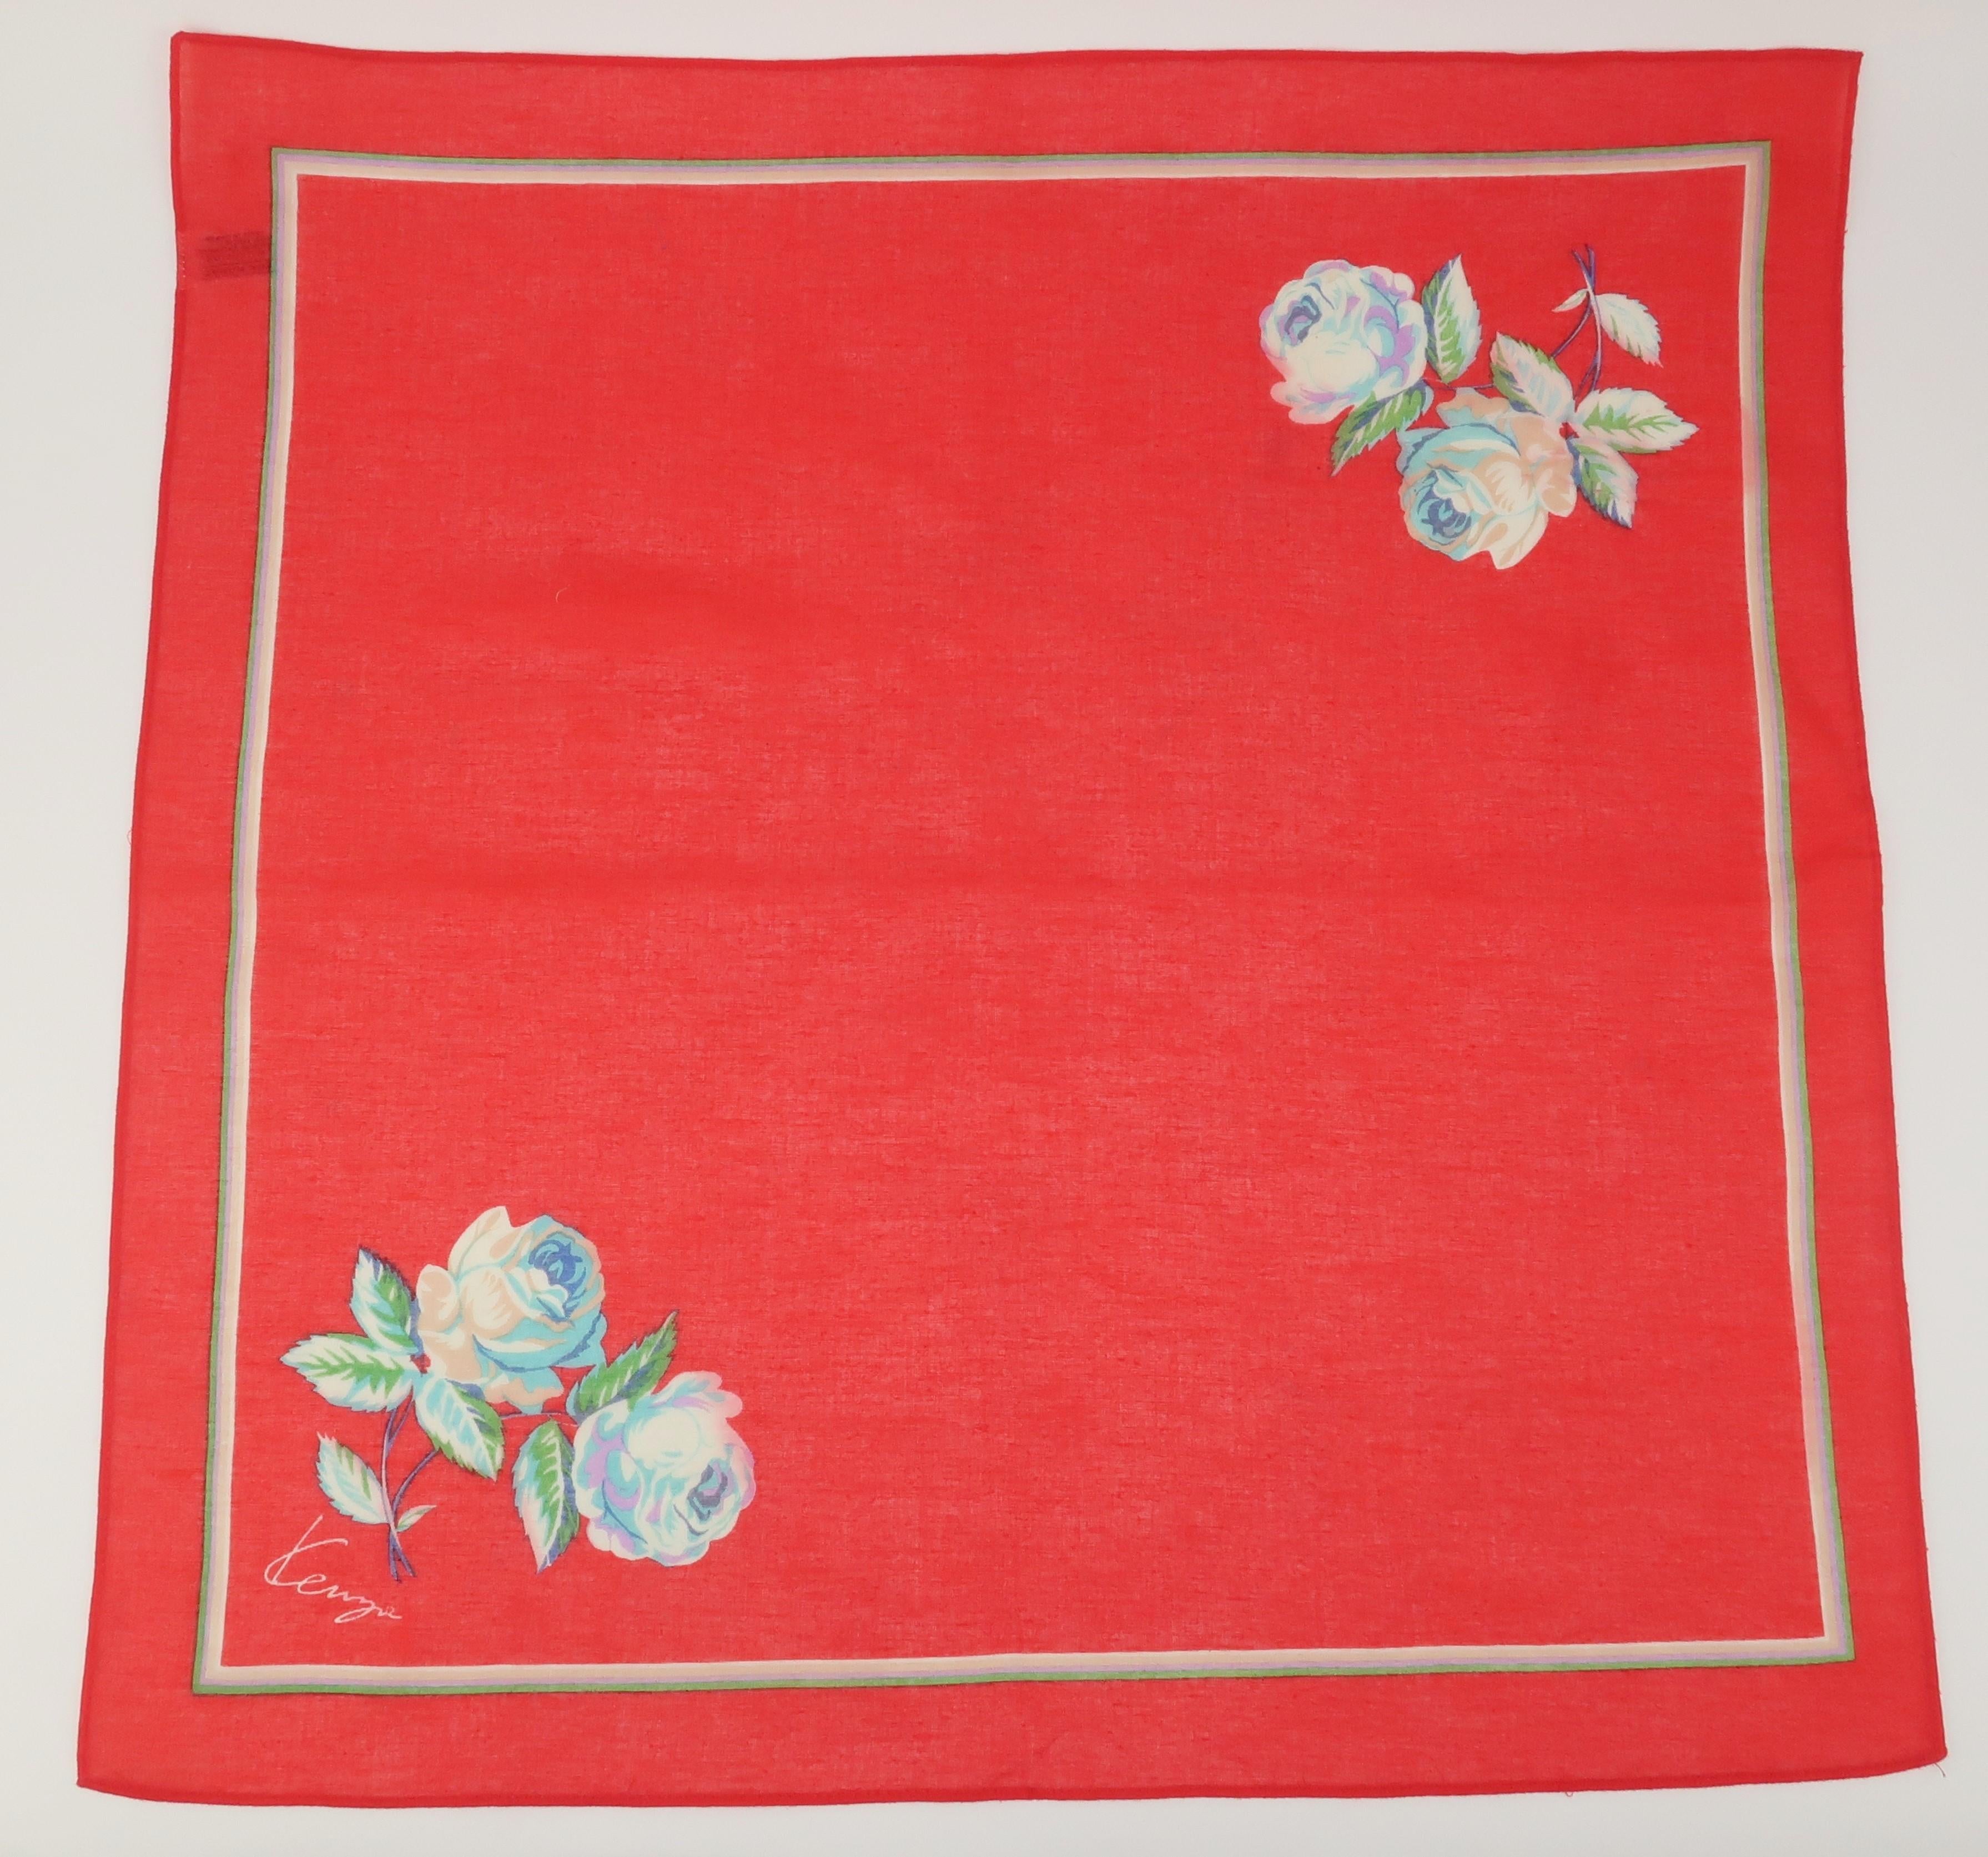 1980's red floral cotton scarf by Japanese designer, Kenzo.  The simple scarf displays a border in shades of green, purple and beige and traditional roses in shades of beige, blue, lilac and green.  Perfect for a neckerchief, head scarf or hankie.